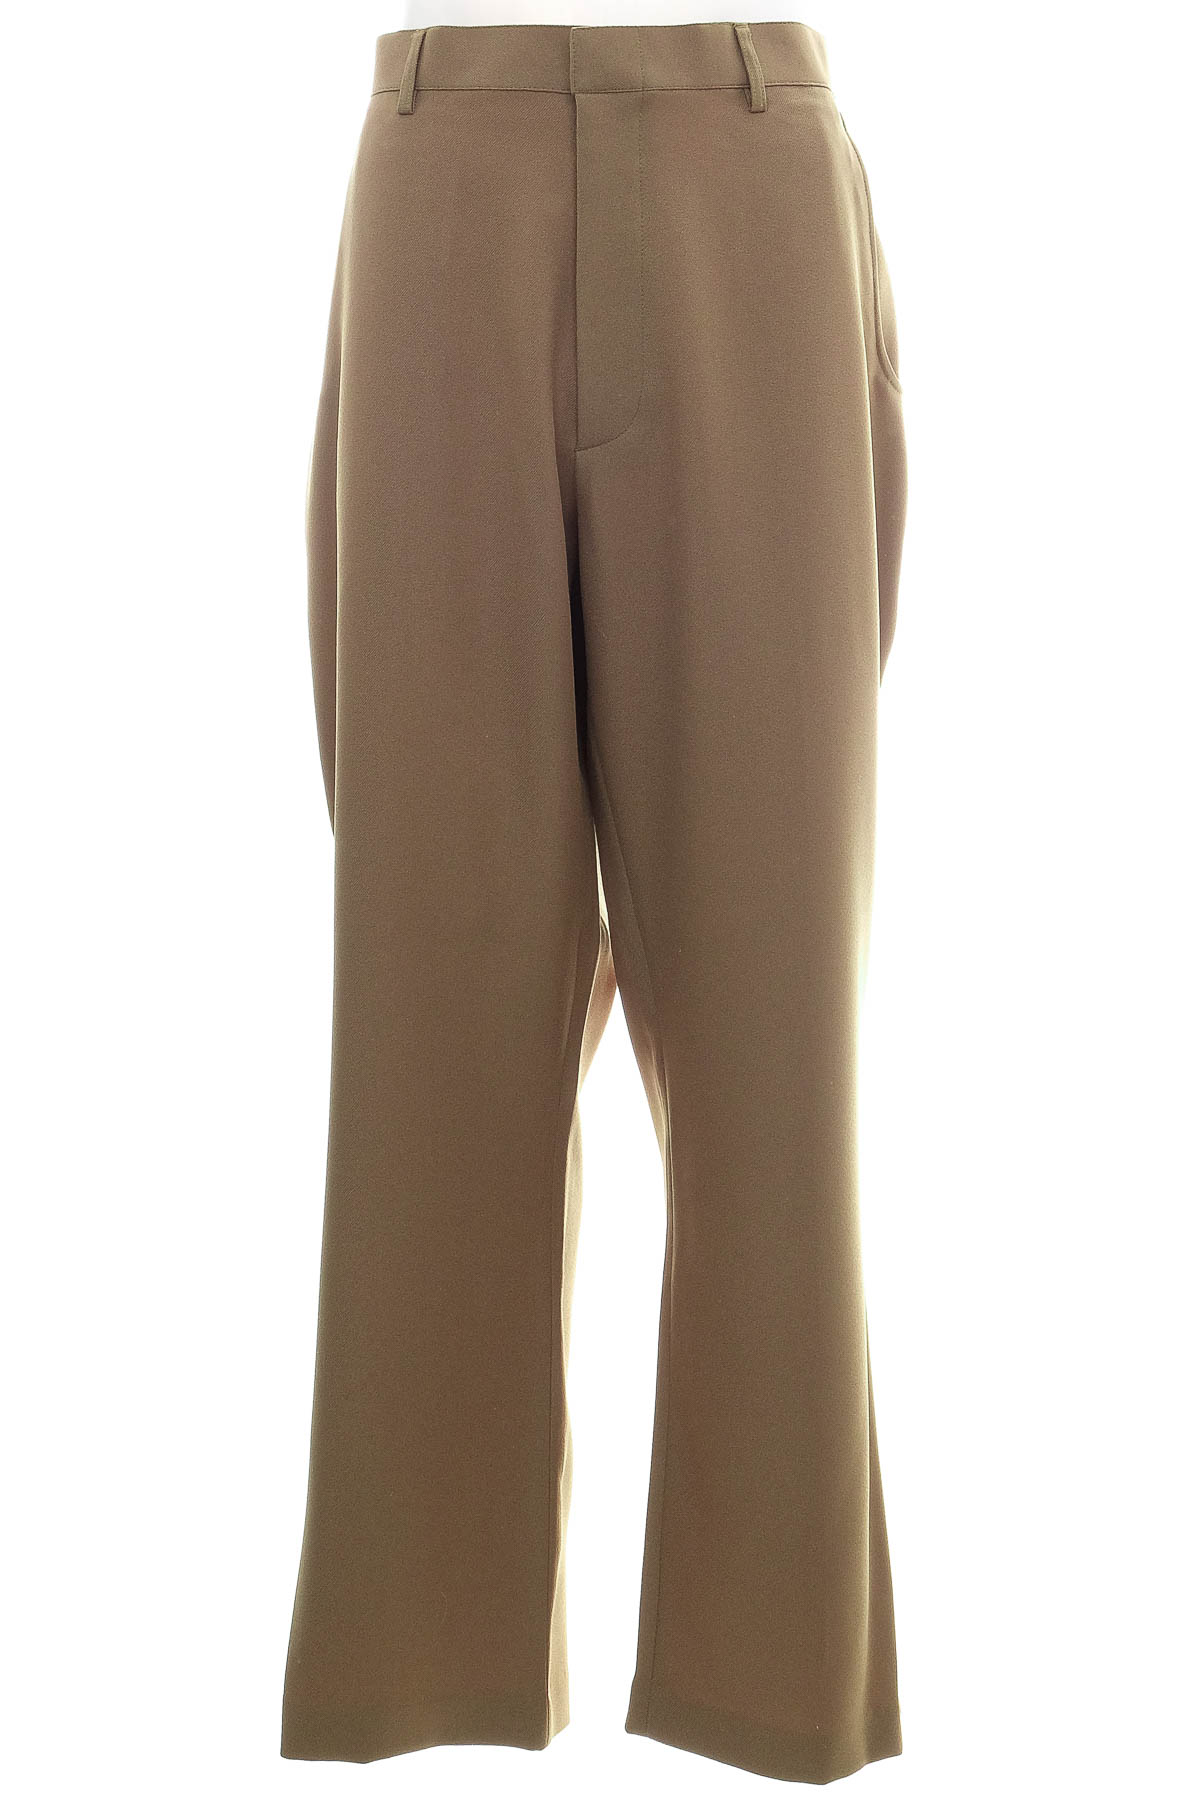 Men's trousers - HABAND - 0